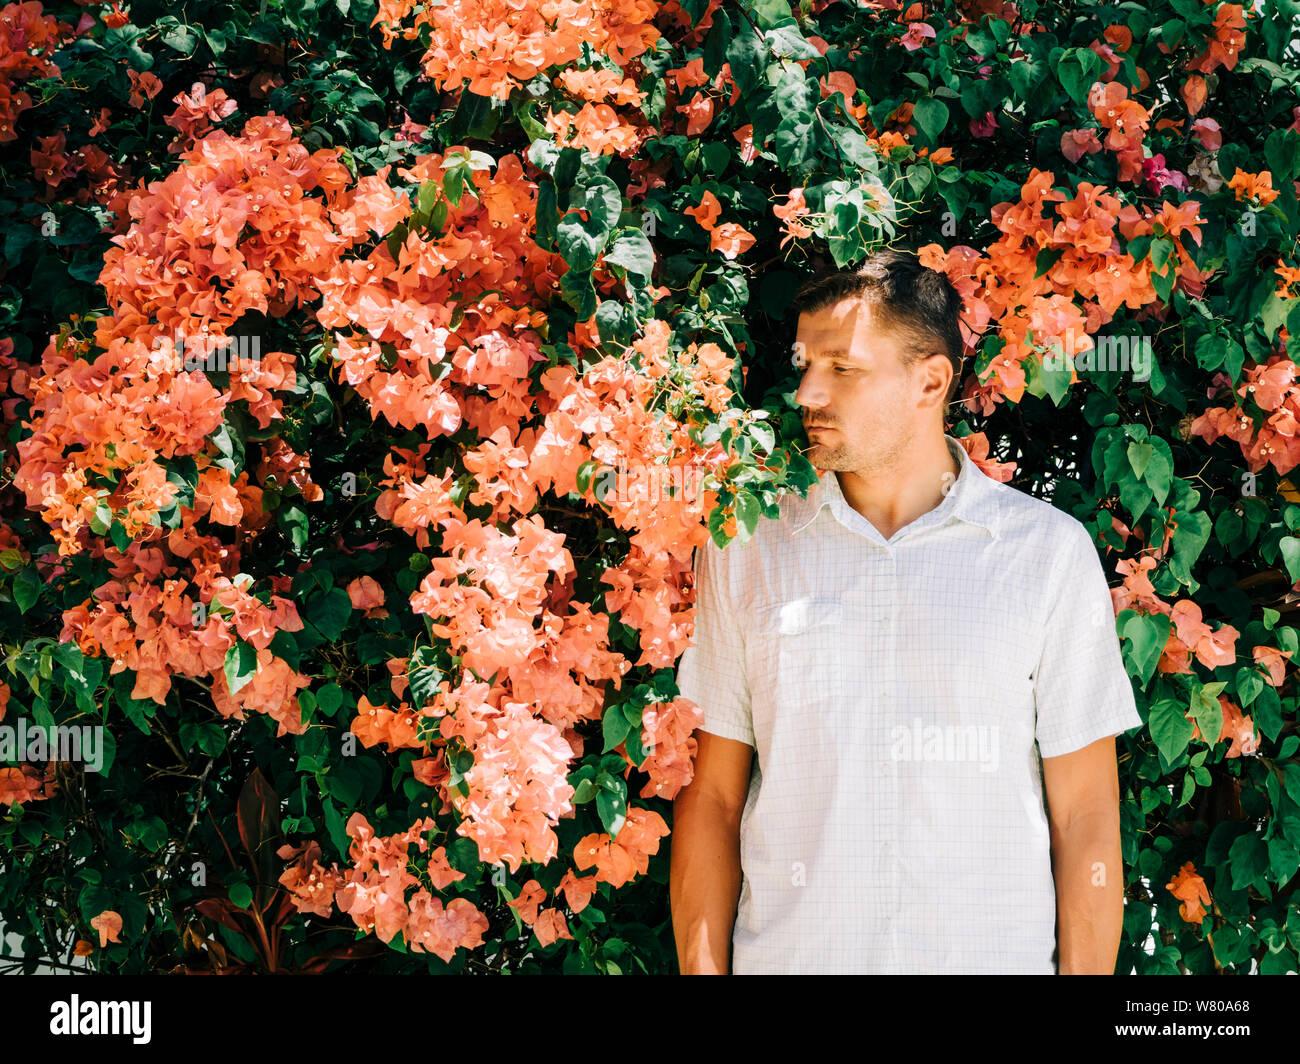 Portrait of an adult man wearing a white shirt on vacation on a tropical island on the background of a garden with pink flowers. Toned image. Stock Photo